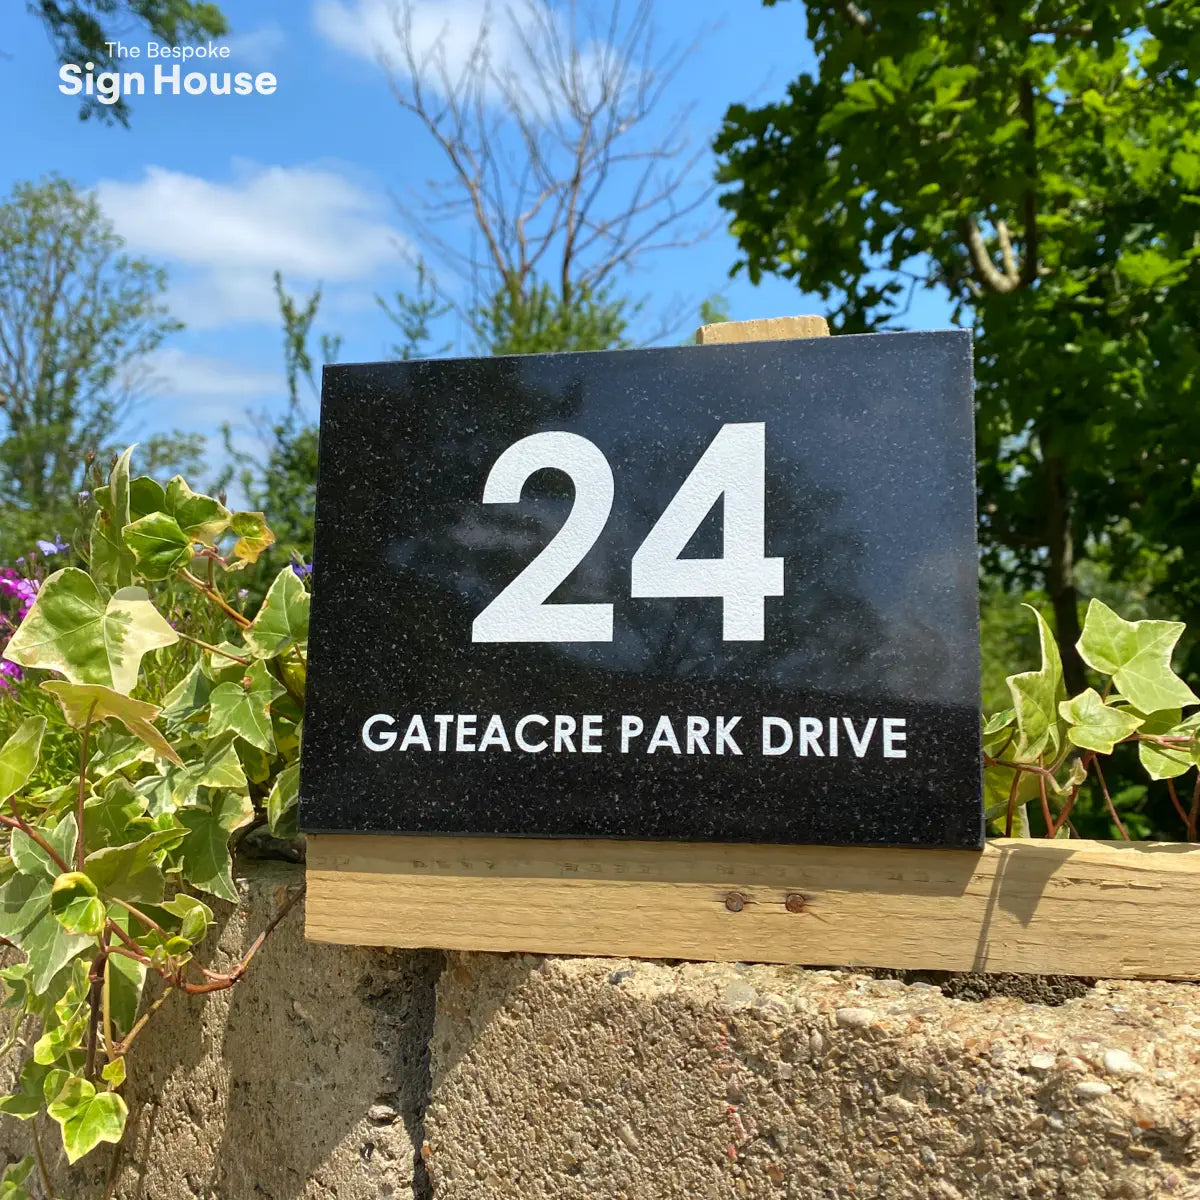 black granite house sign with engraved and painted white text that says 24 Gateacre Park Drive